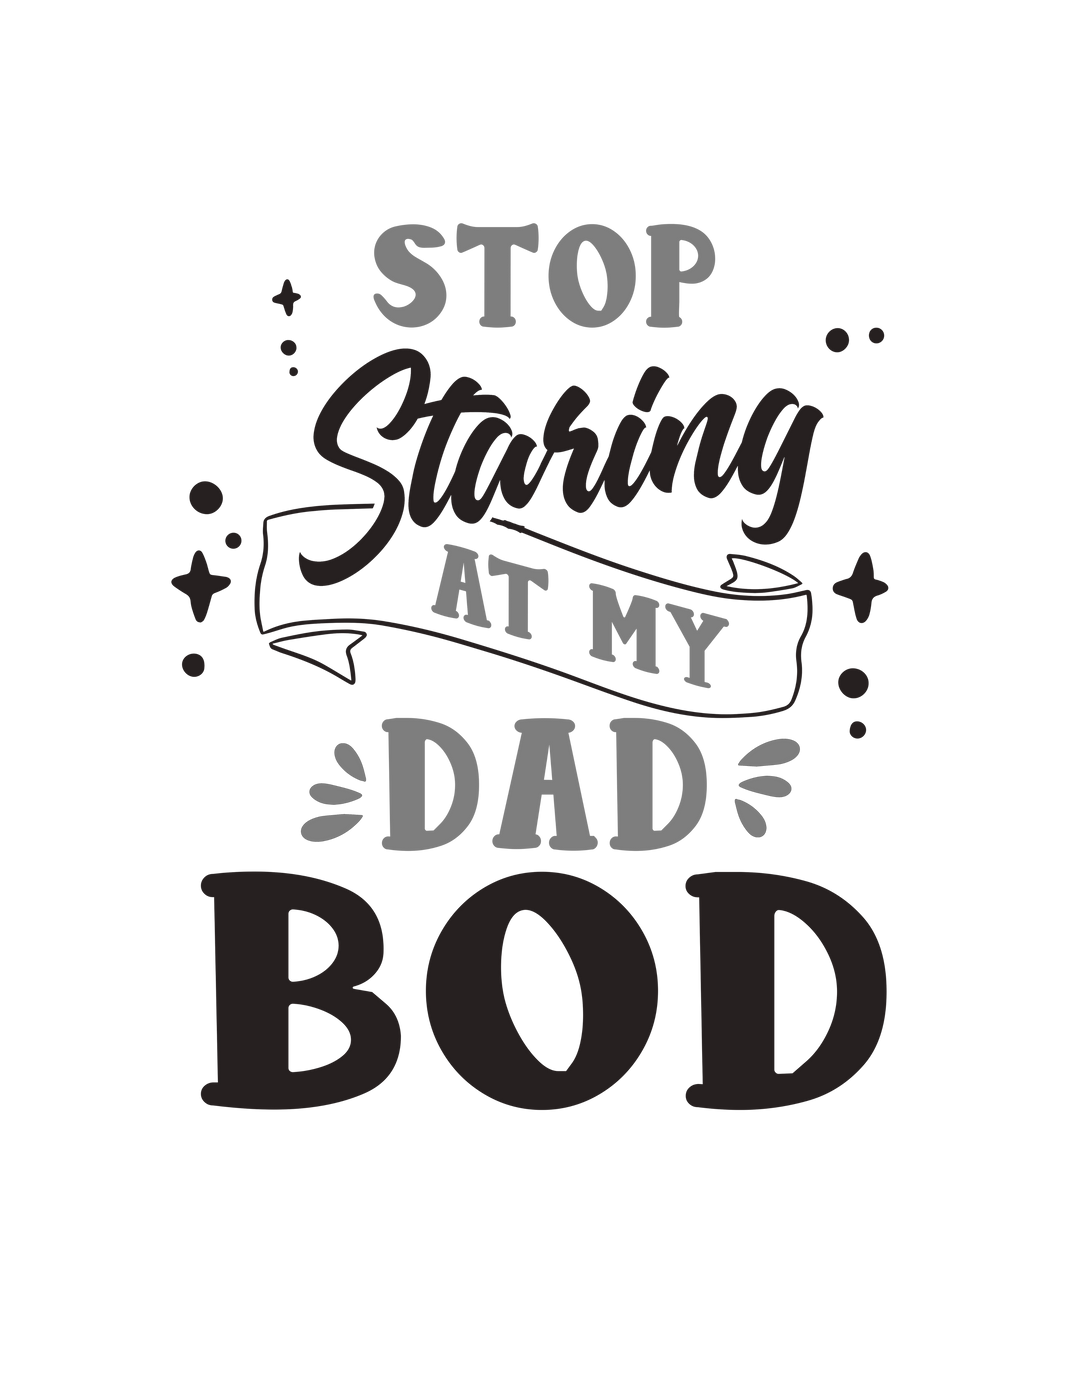 Stop Staring at My Dad Bod Tee